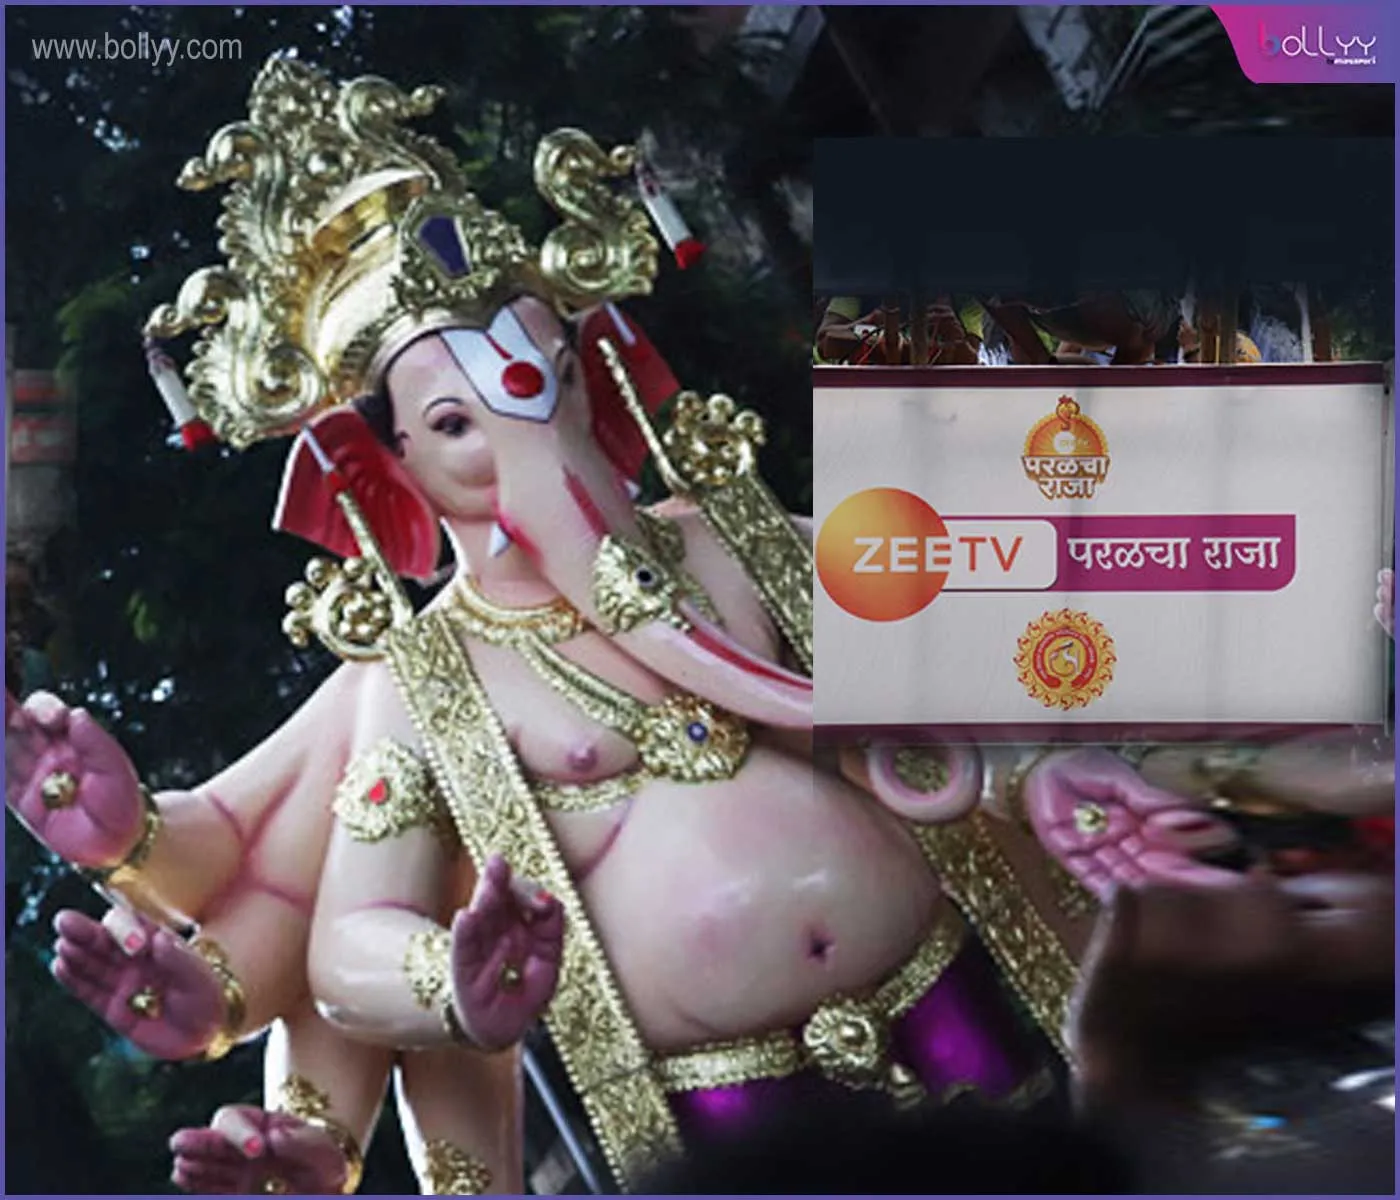 Zee TV continues to partner with Parel Cha Raja second year in a row, the channel’s most popular face to visit the pandal!